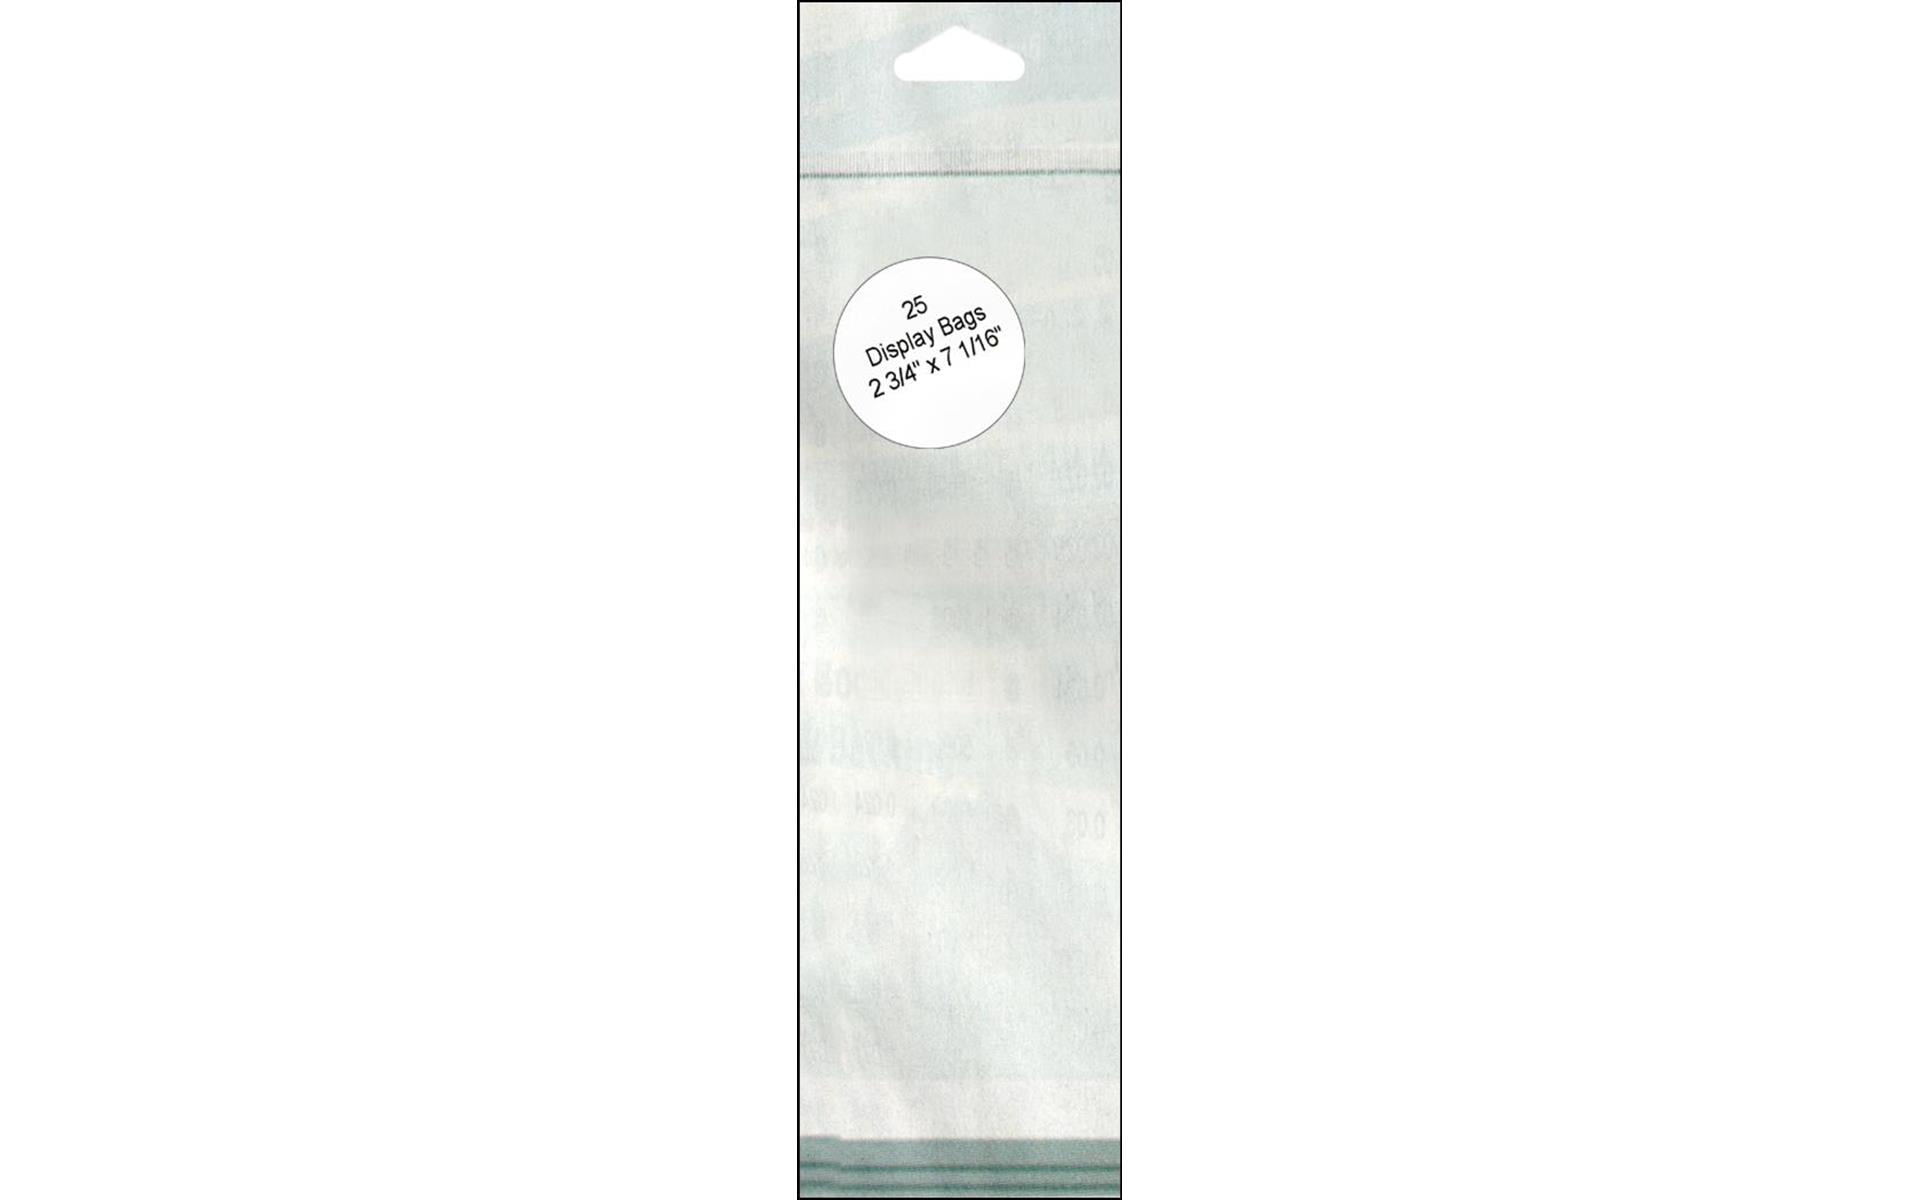 Cellophane Display Bag for Bookmarks/ Gifts Clear Tall/Slim Cello Display Bags 